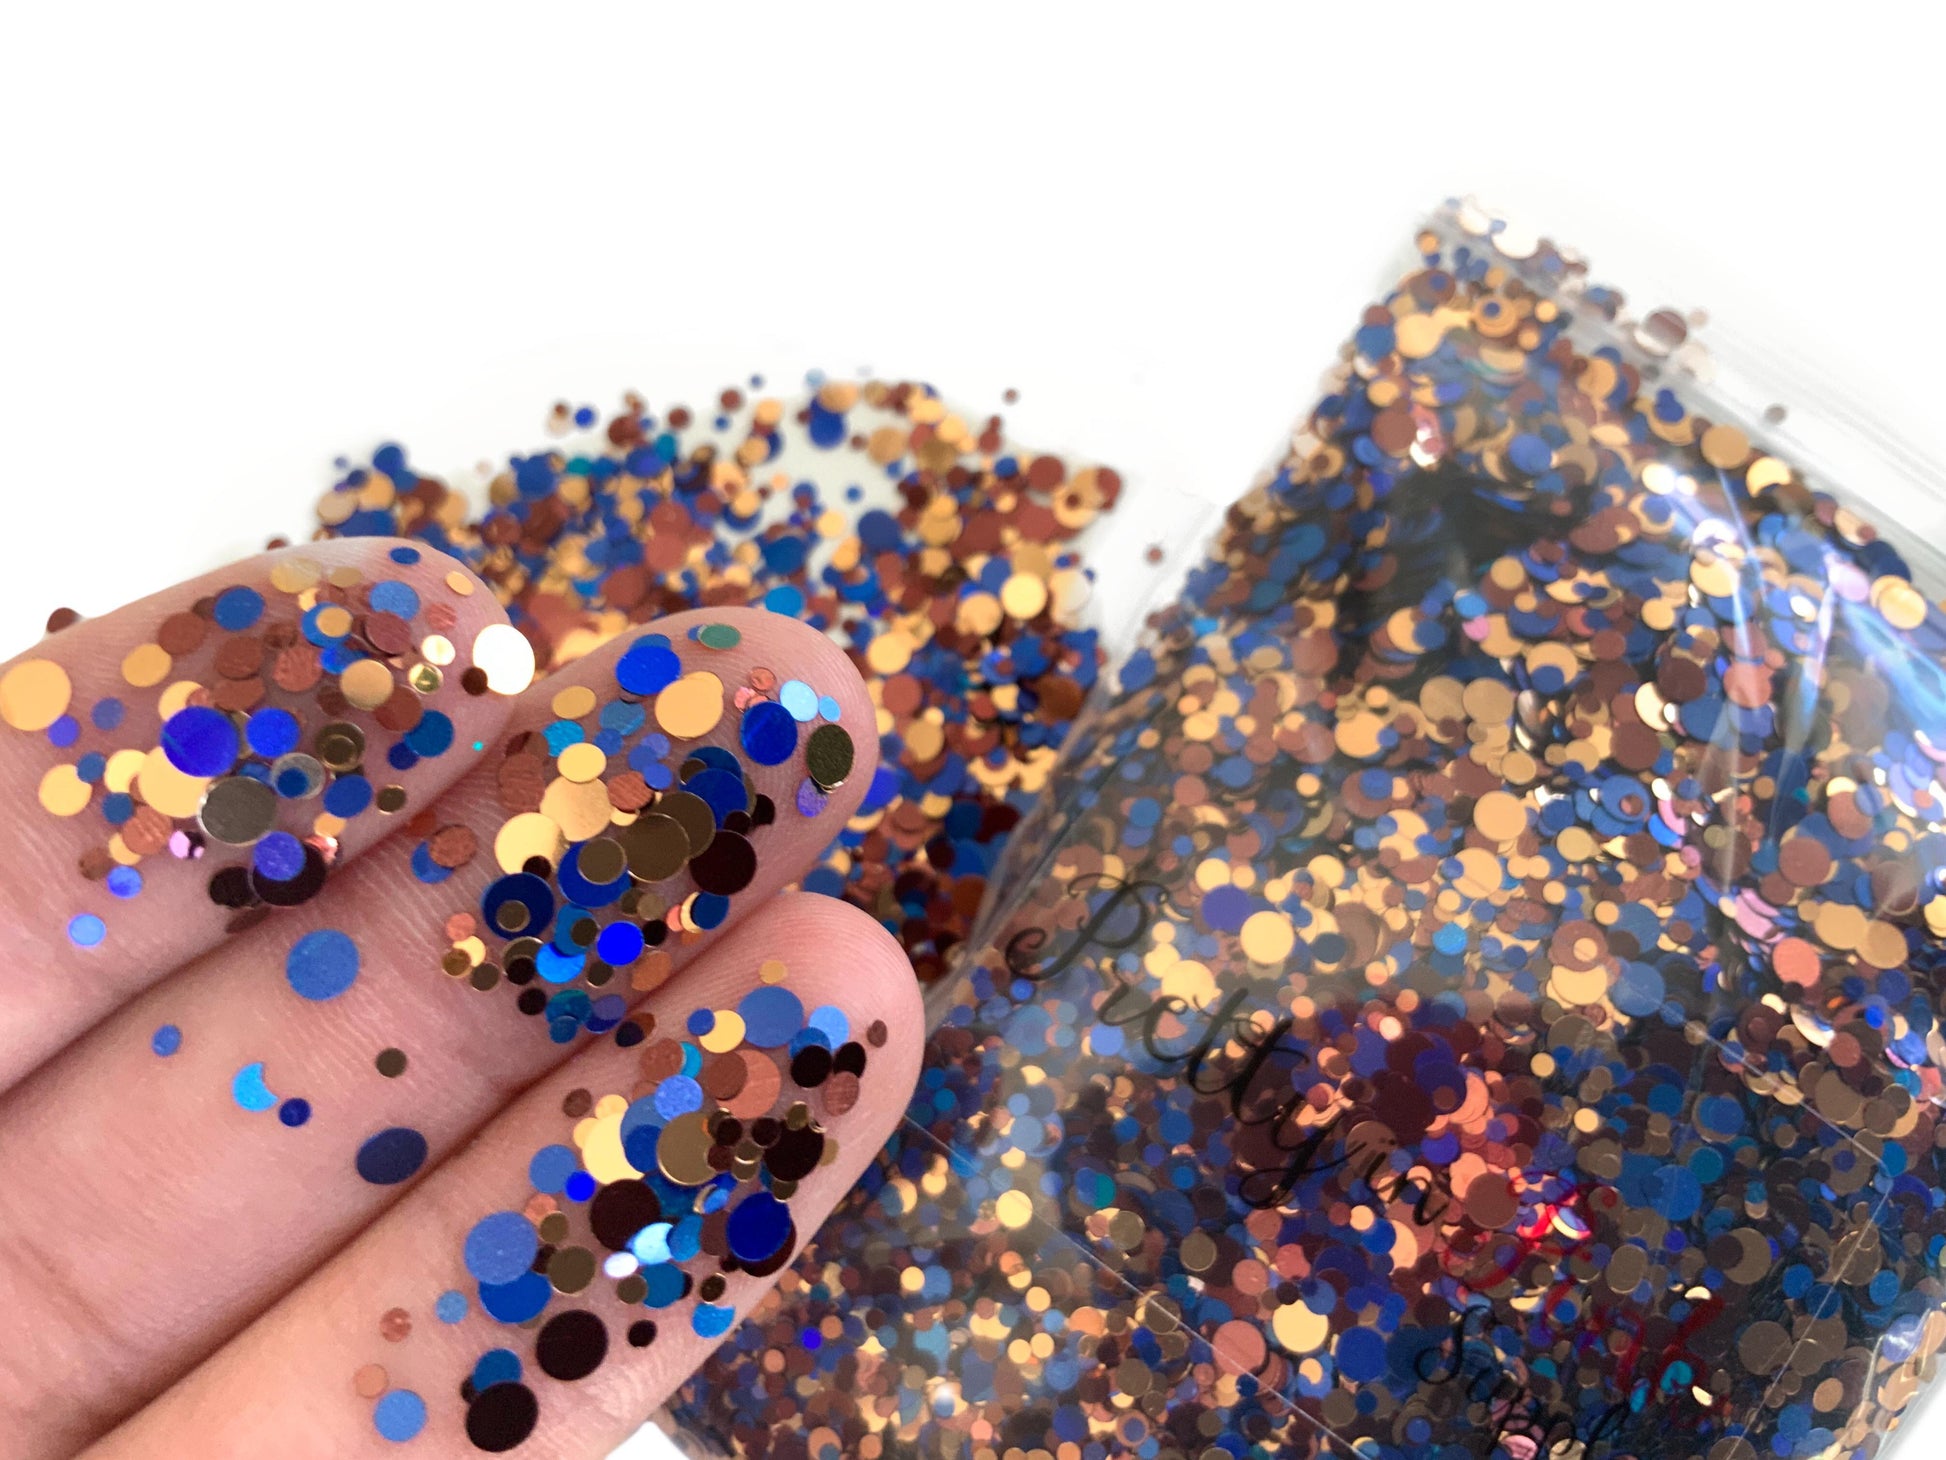 Royal Blue/Brown Mix Confetti Loose Glitter - Pretty in Pink Supply